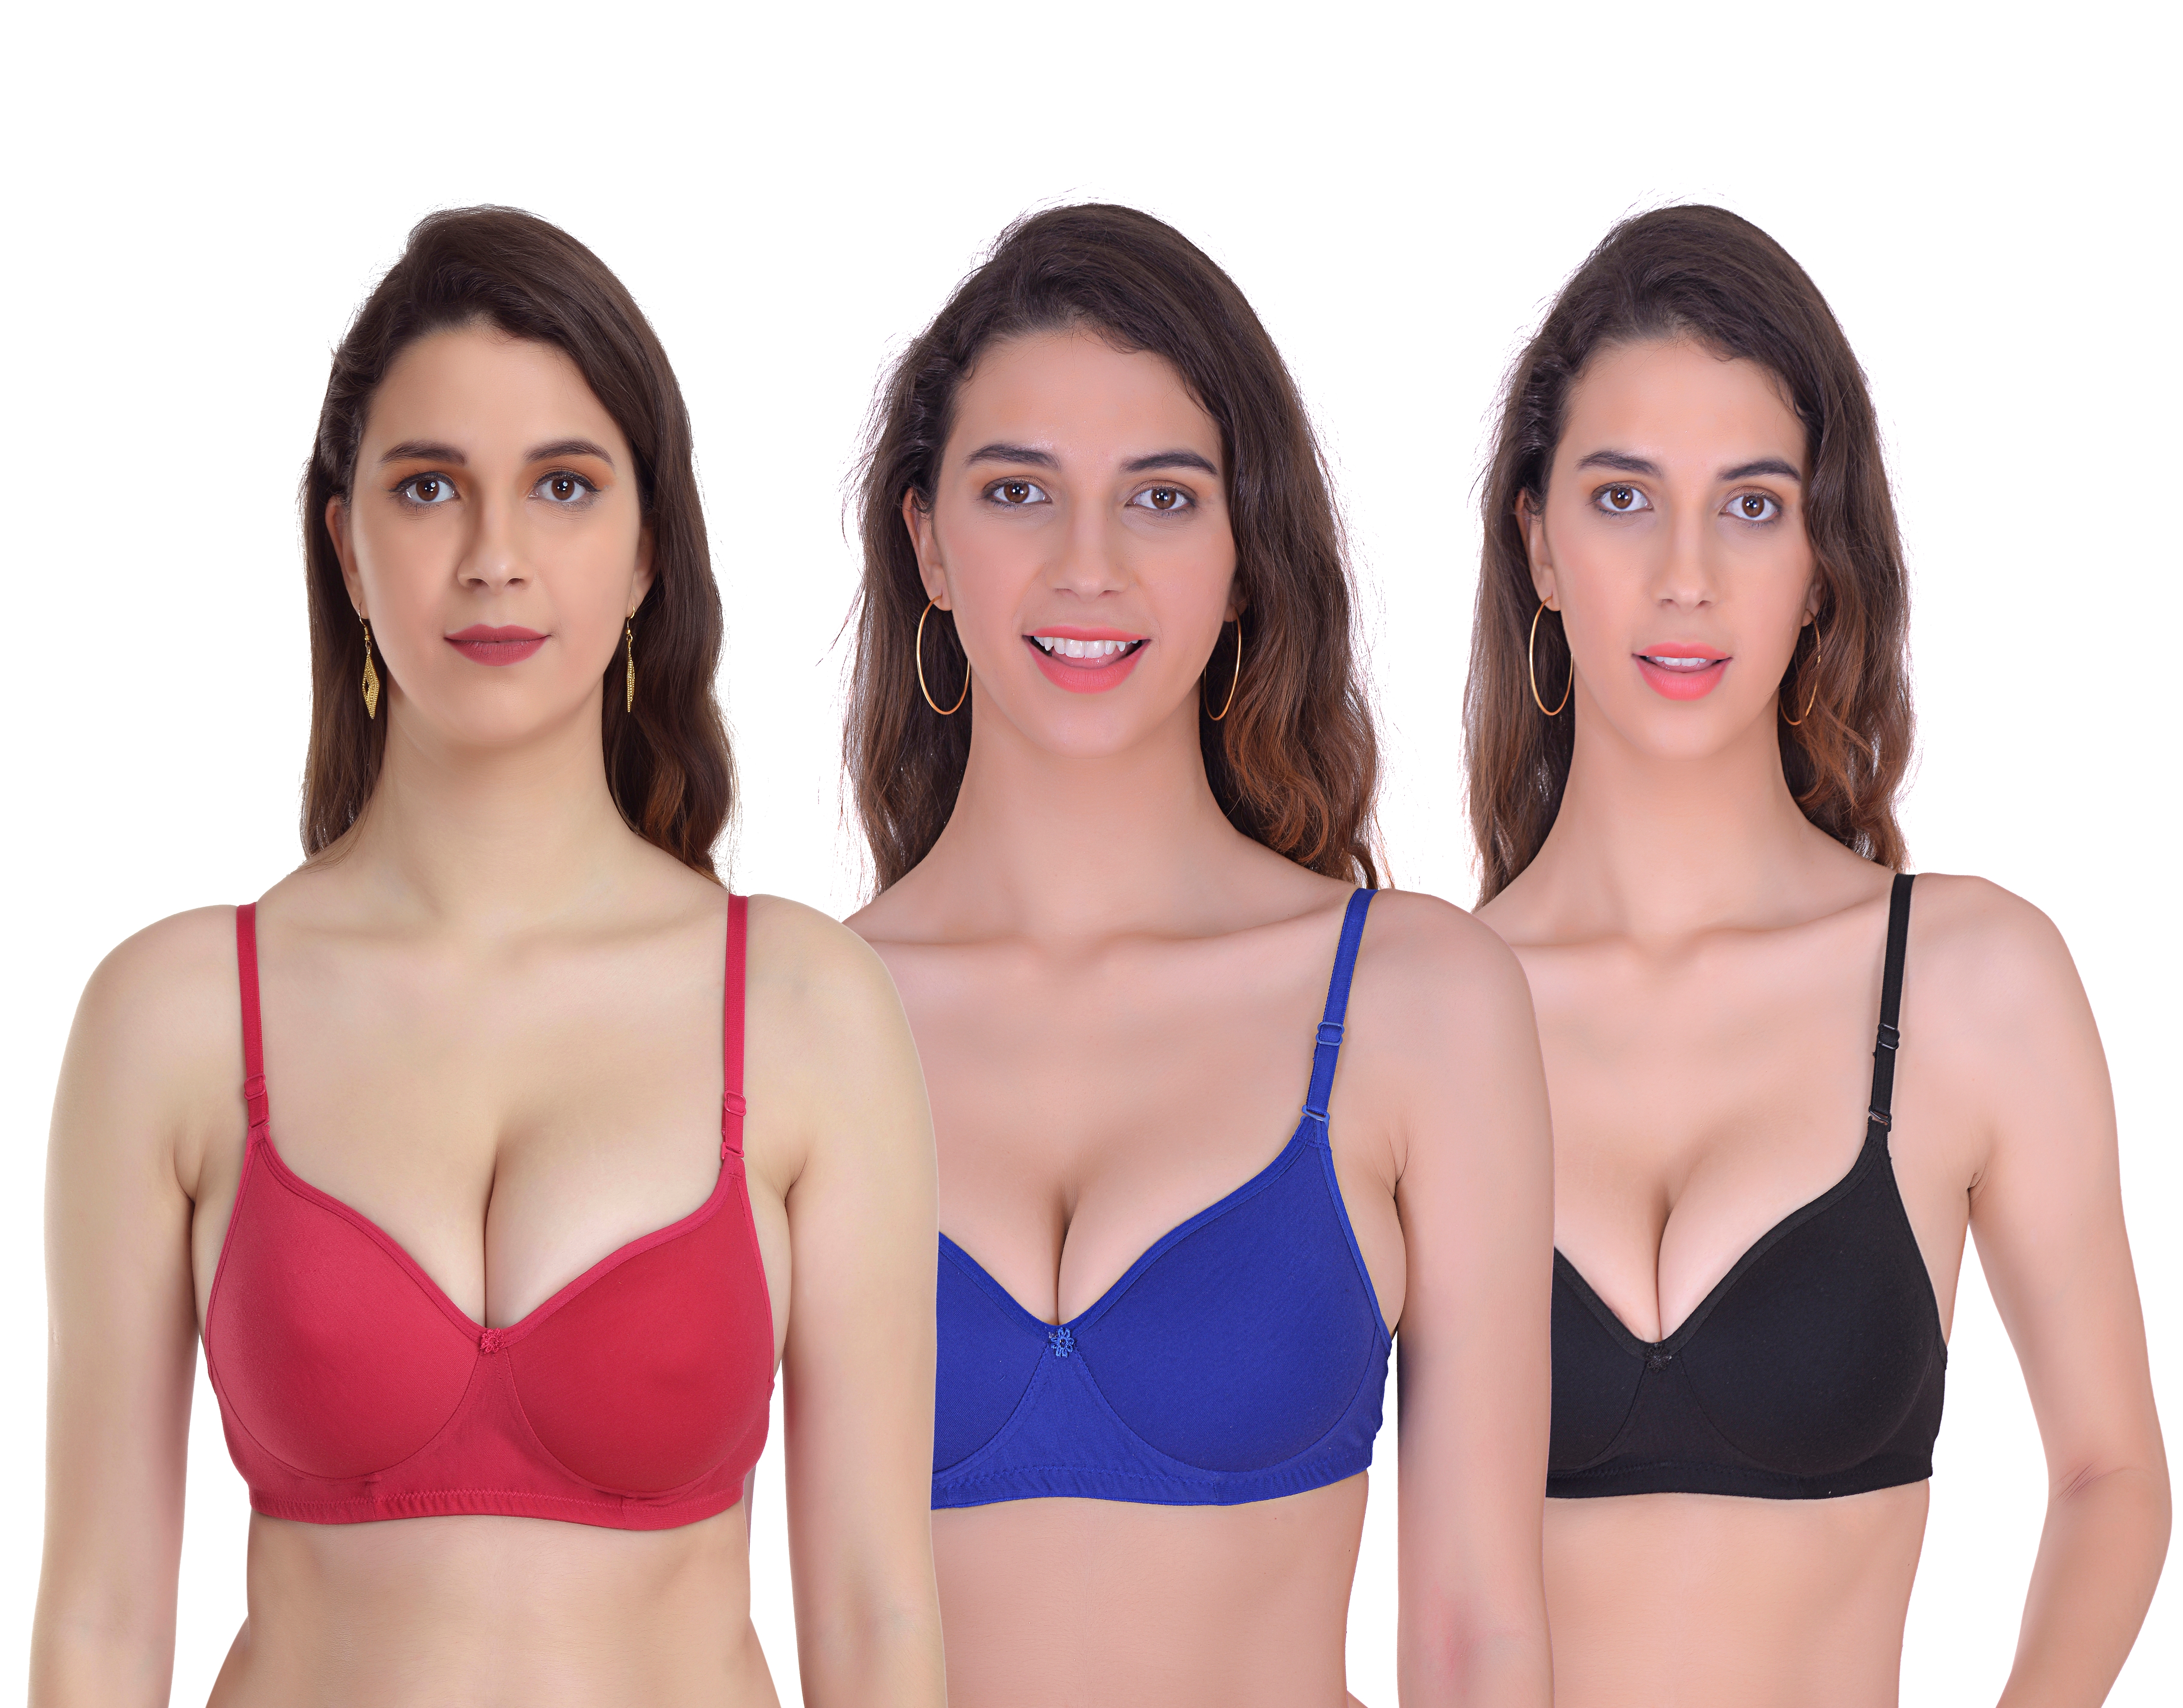 Mynte Women's Cotton Rich Lightly Padded Non-Wired Full Cup Regular Bra (Pack of 3) (Red/Blue/Black,30) (MY-CPPB-7RBLBK-30)